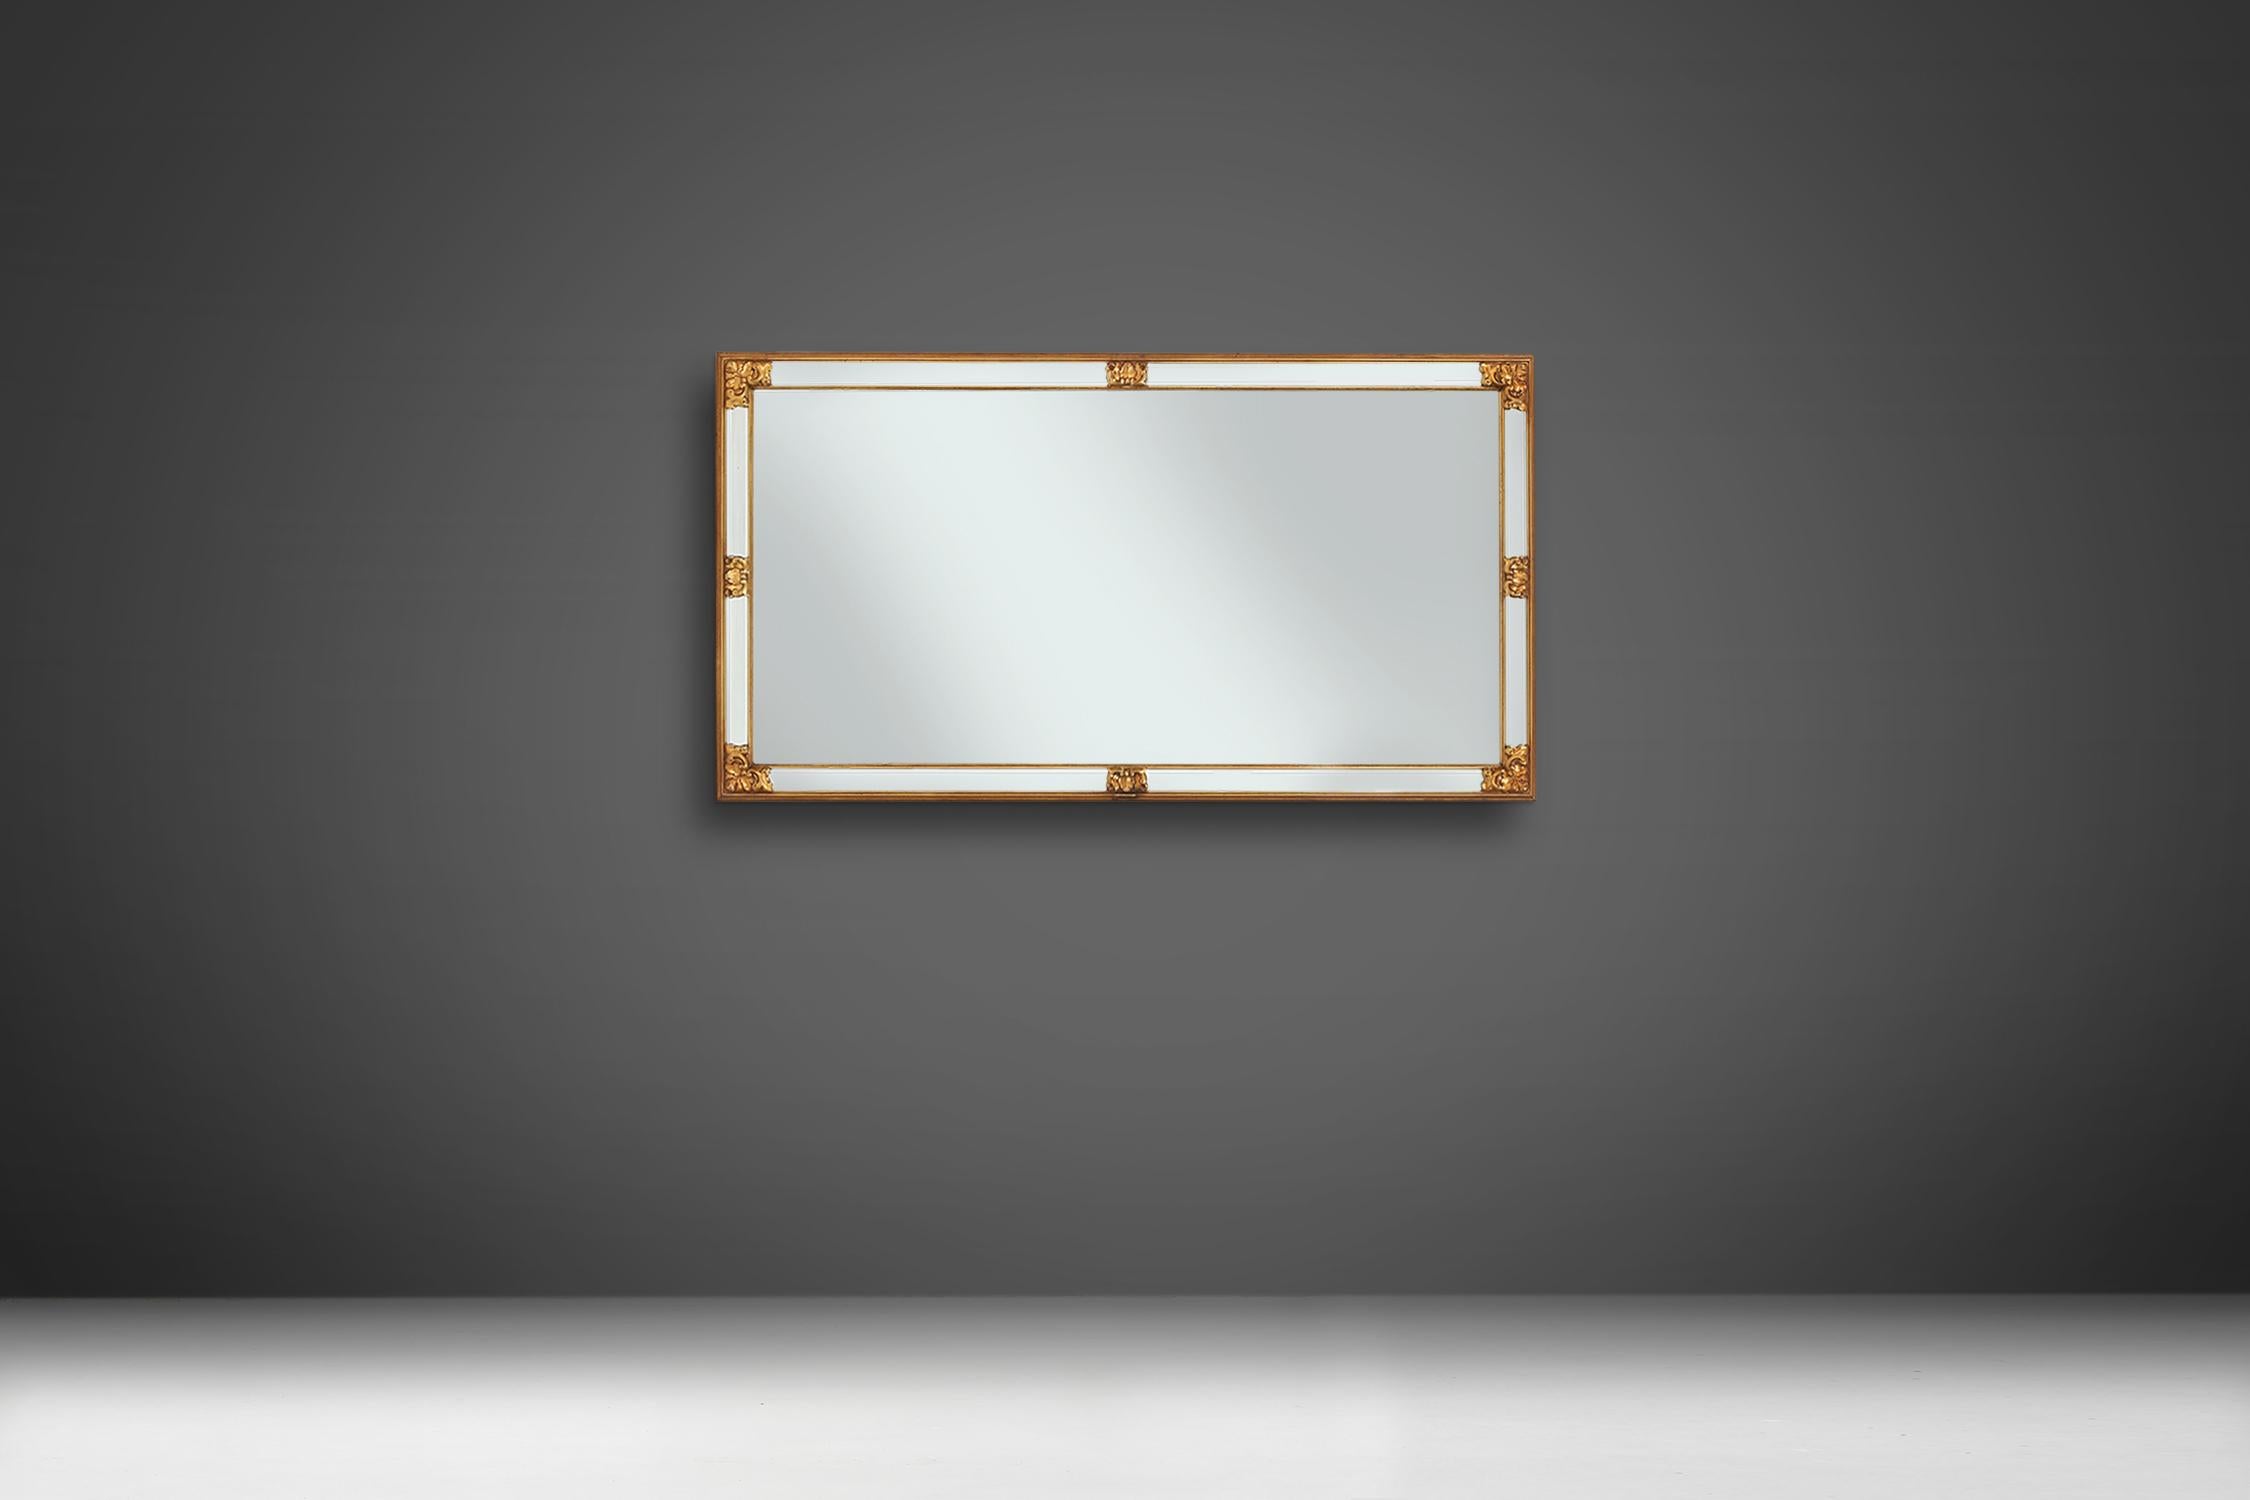 Belgian mirror by brand Deknudt made in the 1970s.
This large model with some great golden details and cut glass.
The mirror can be placed horizontal and vertical.